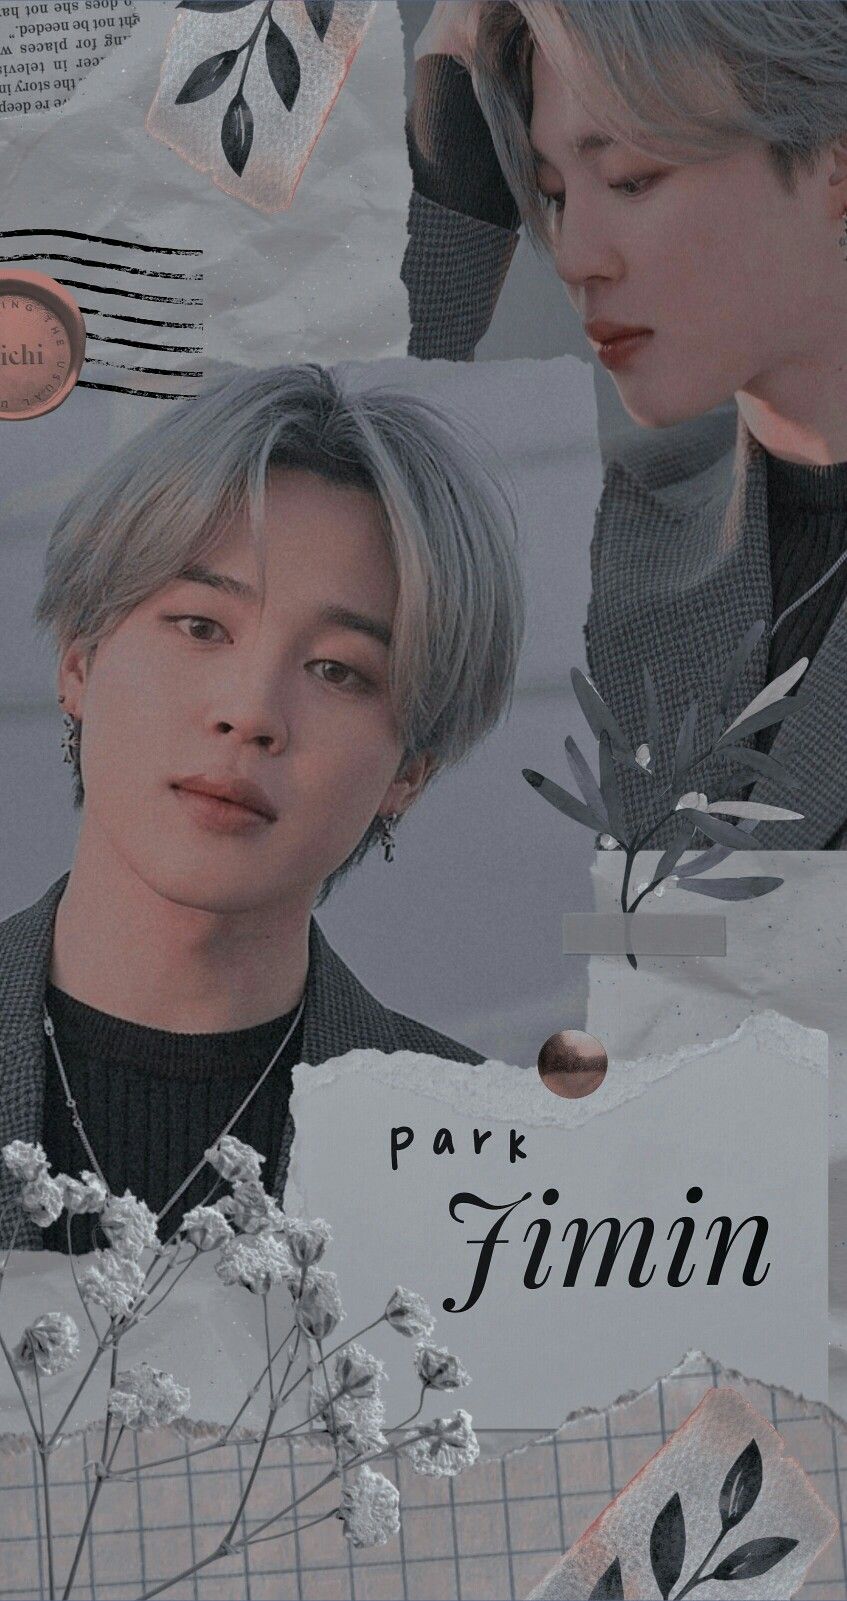 Park Jimin wallpaper made by me! If you use it, please give credit! - Jimin